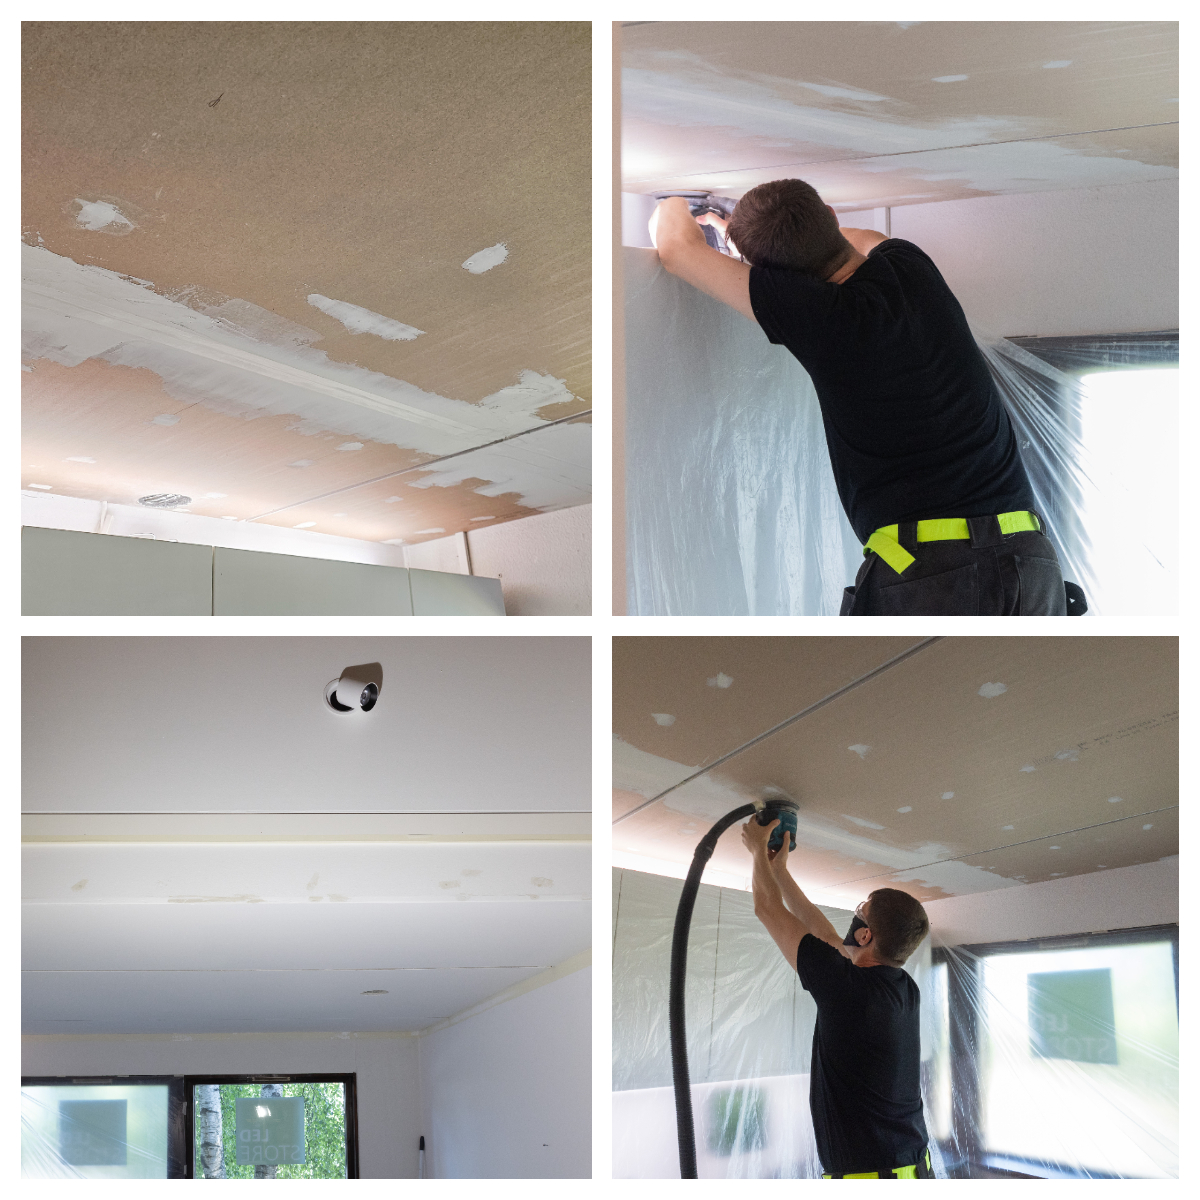 In the lighting renovation, plasterboard is being worked on. LedStore.fi